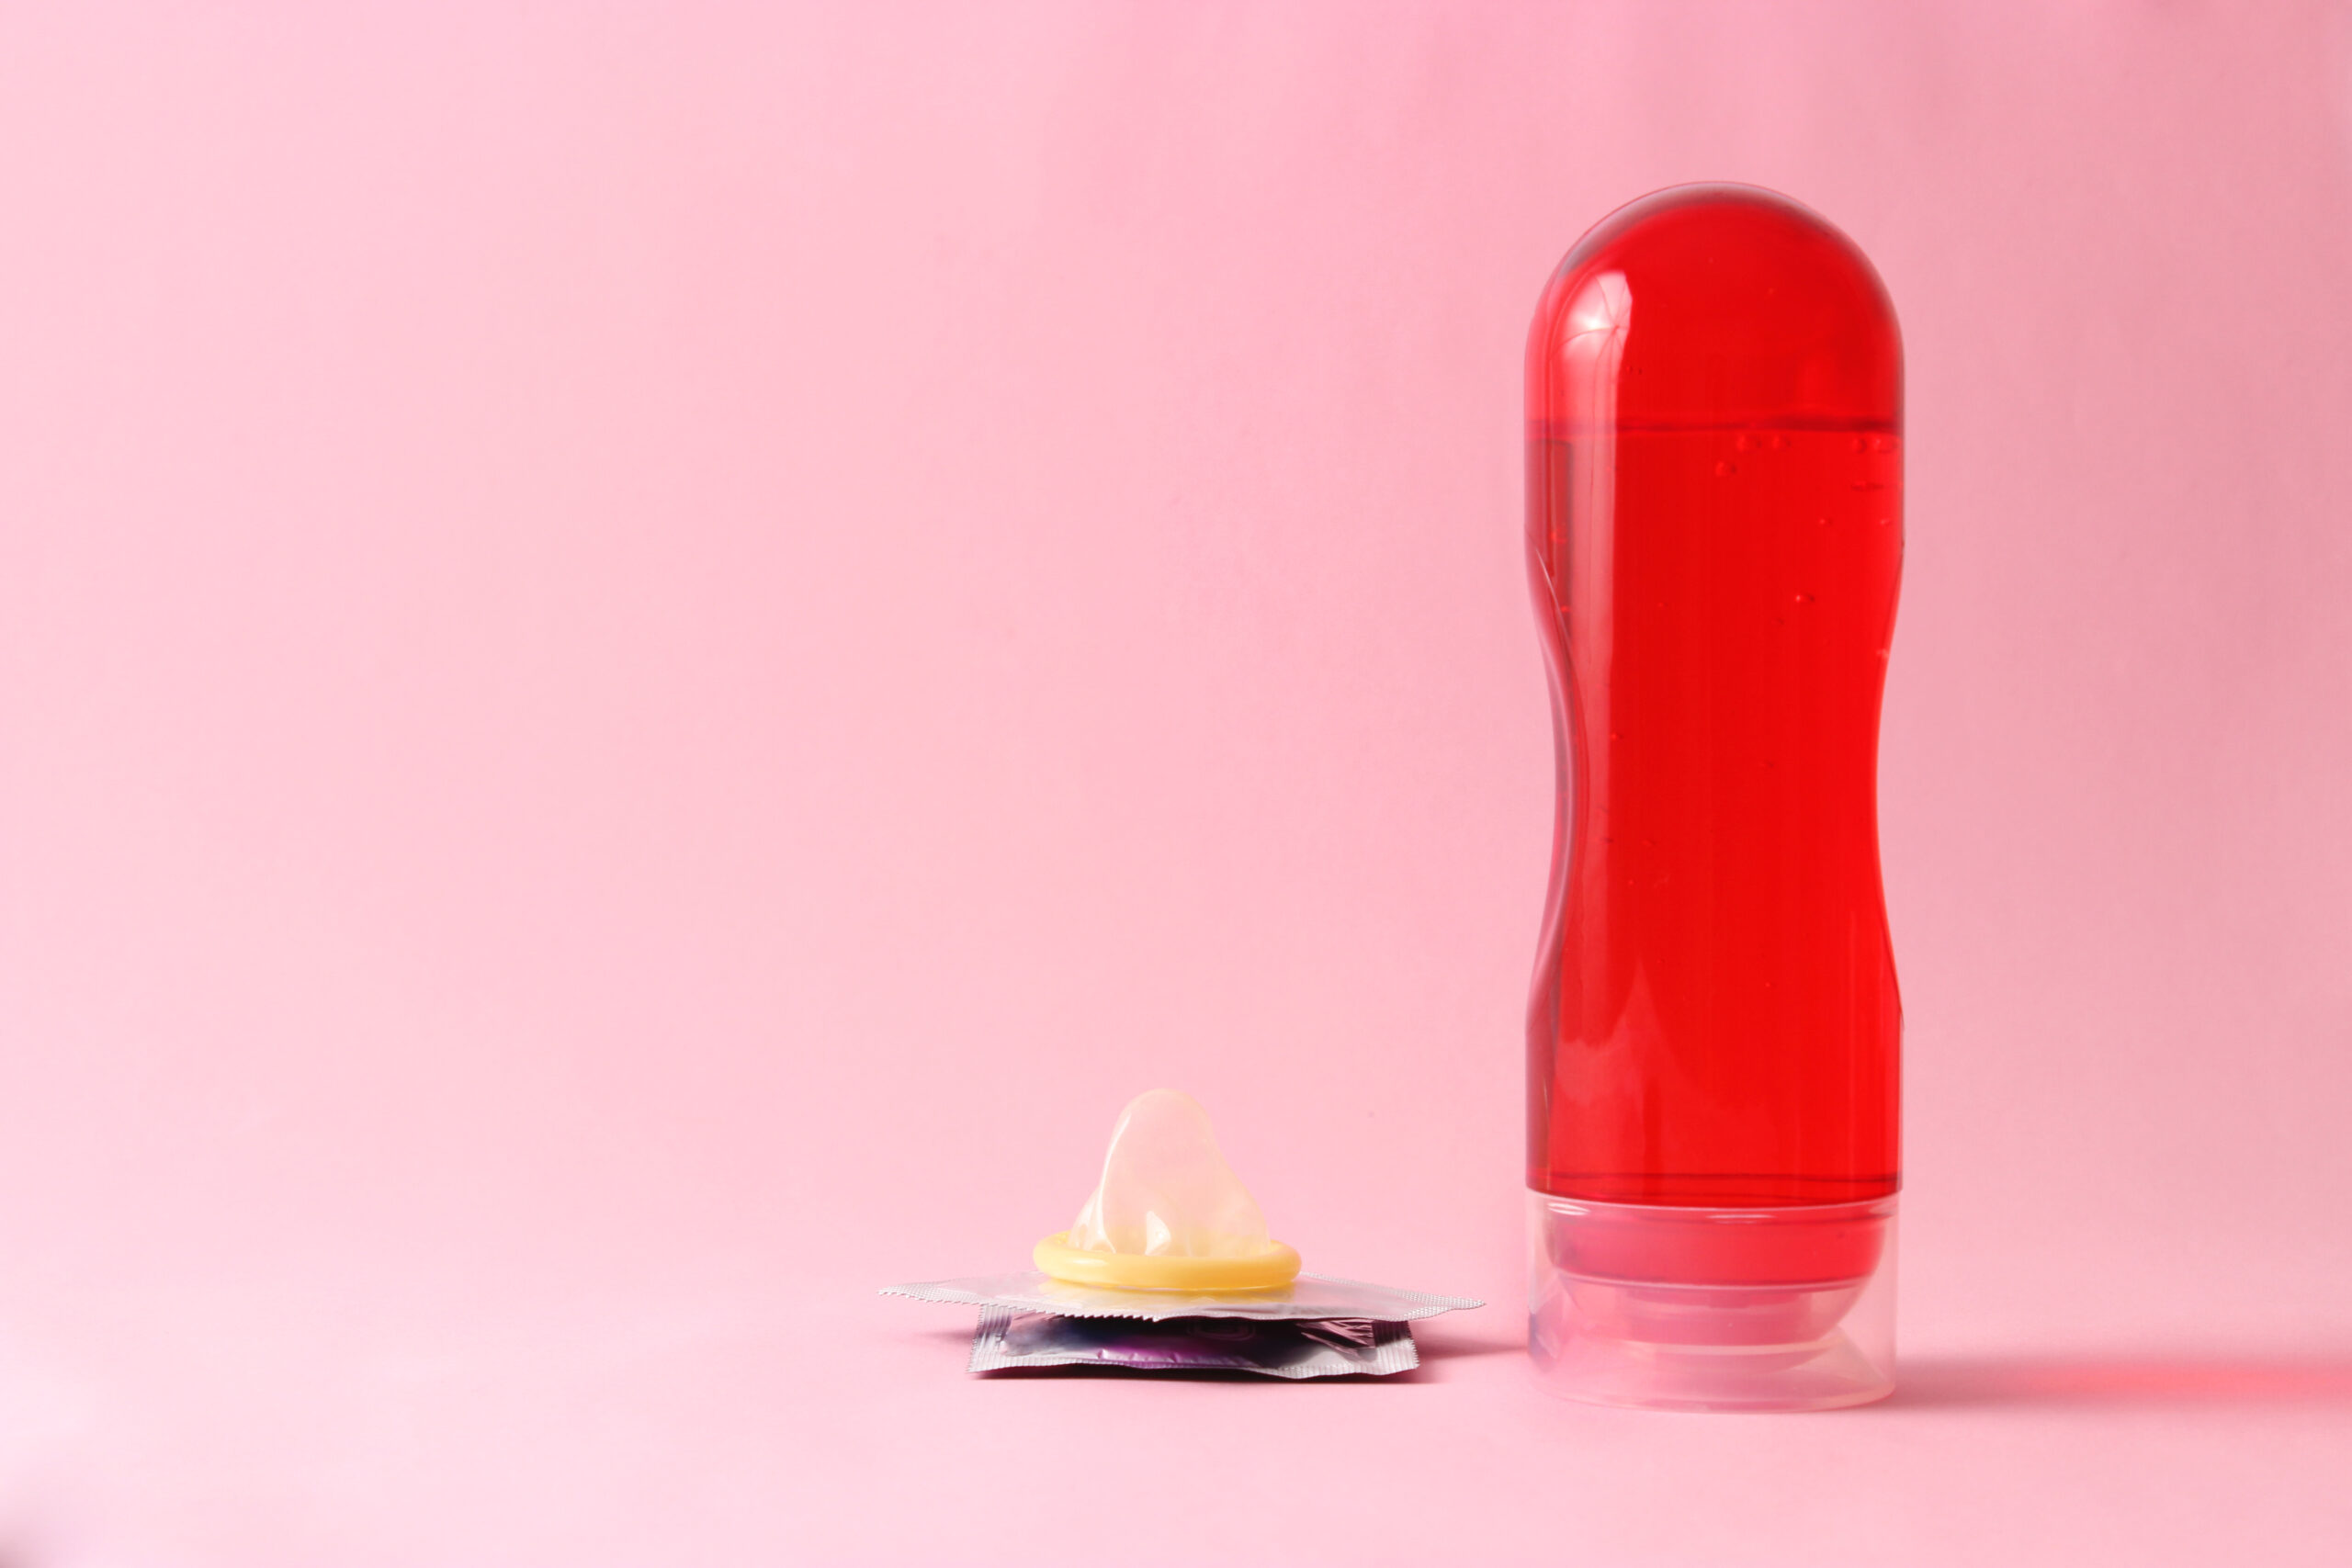 Does sex toys help for anal sex?